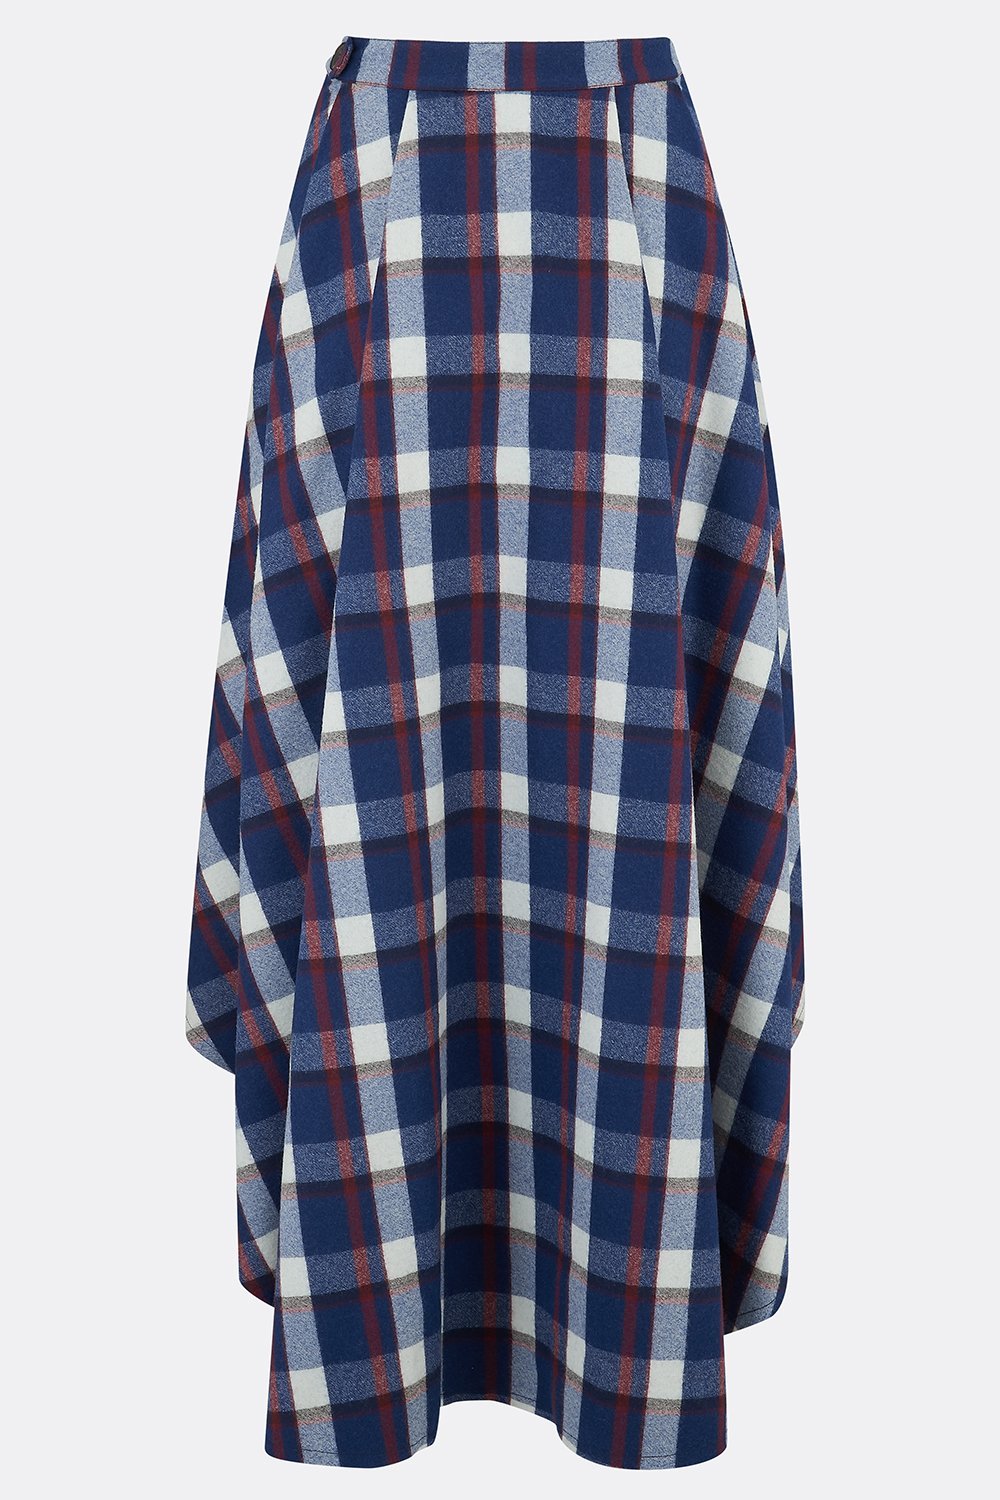 ROXANA SKIRT IN BLUE WHITE CHECK-womenswear-A Child Of The Jago